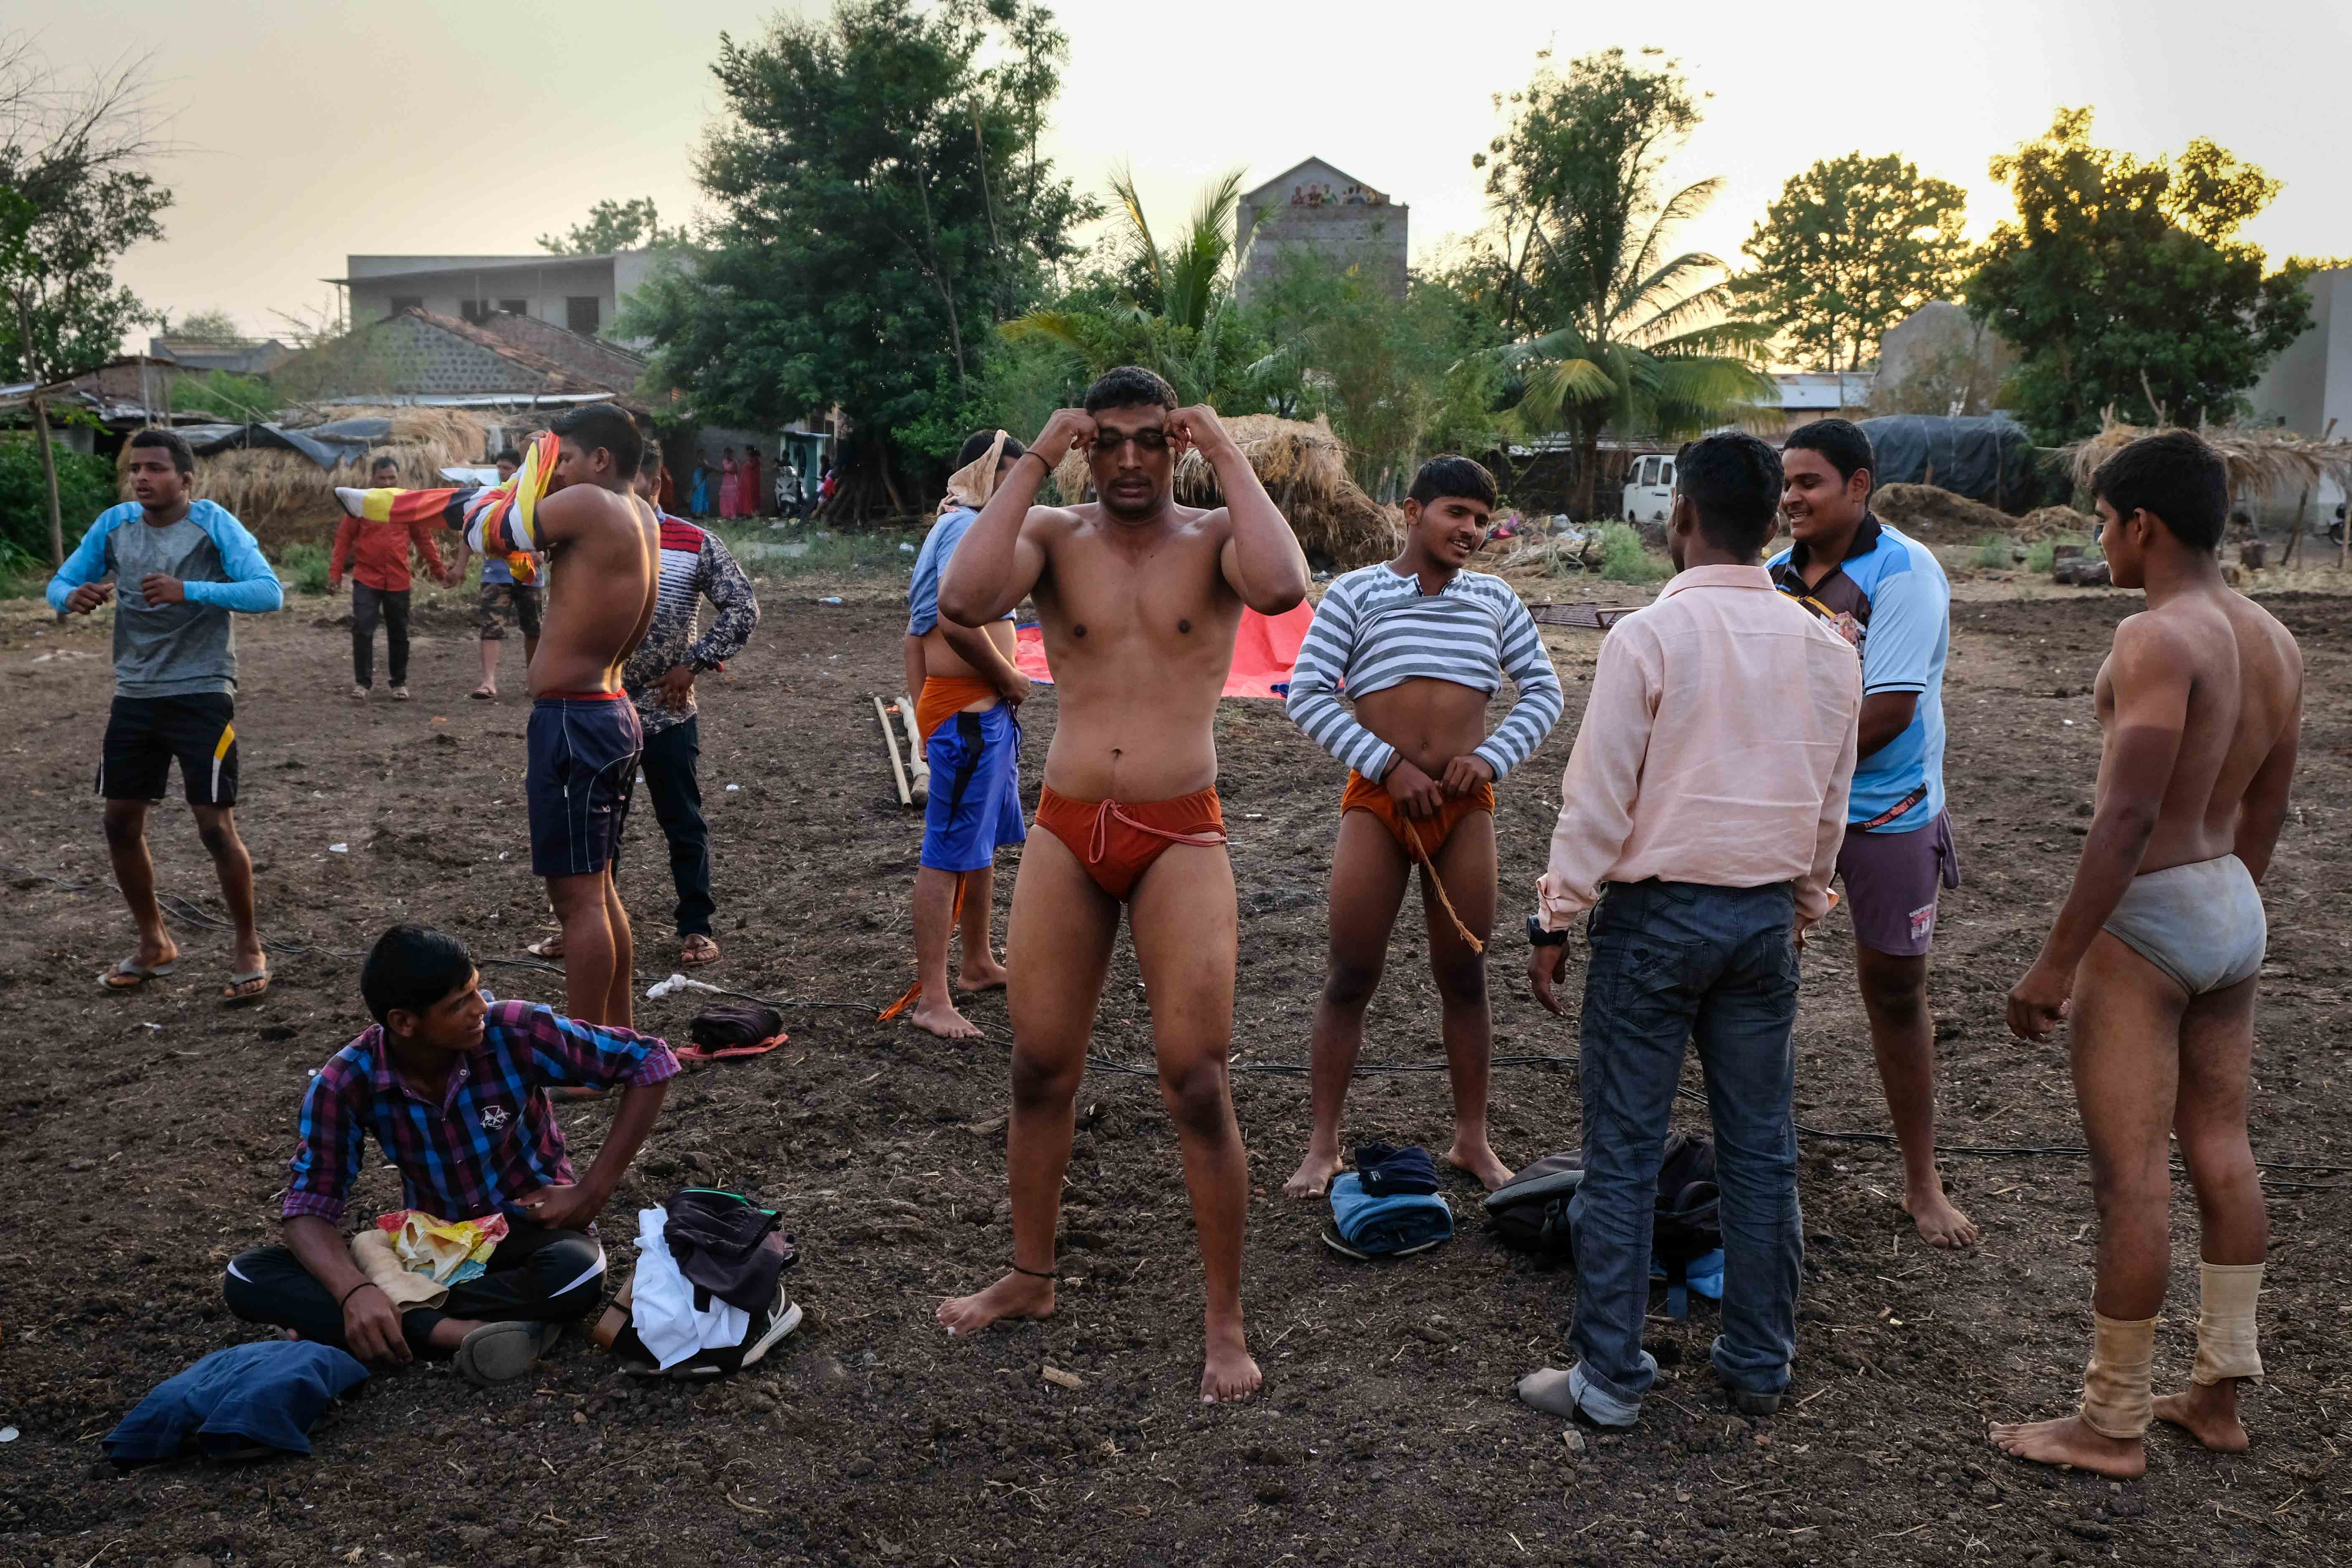 Wrestlers from various villages getting ready before a competition. Such village tournaments are held with minimal arrangements. Participants change their costumes in the open and do a long session of warm-up before each bout. Photograph by Indrajit Khambe ©Sahapedia